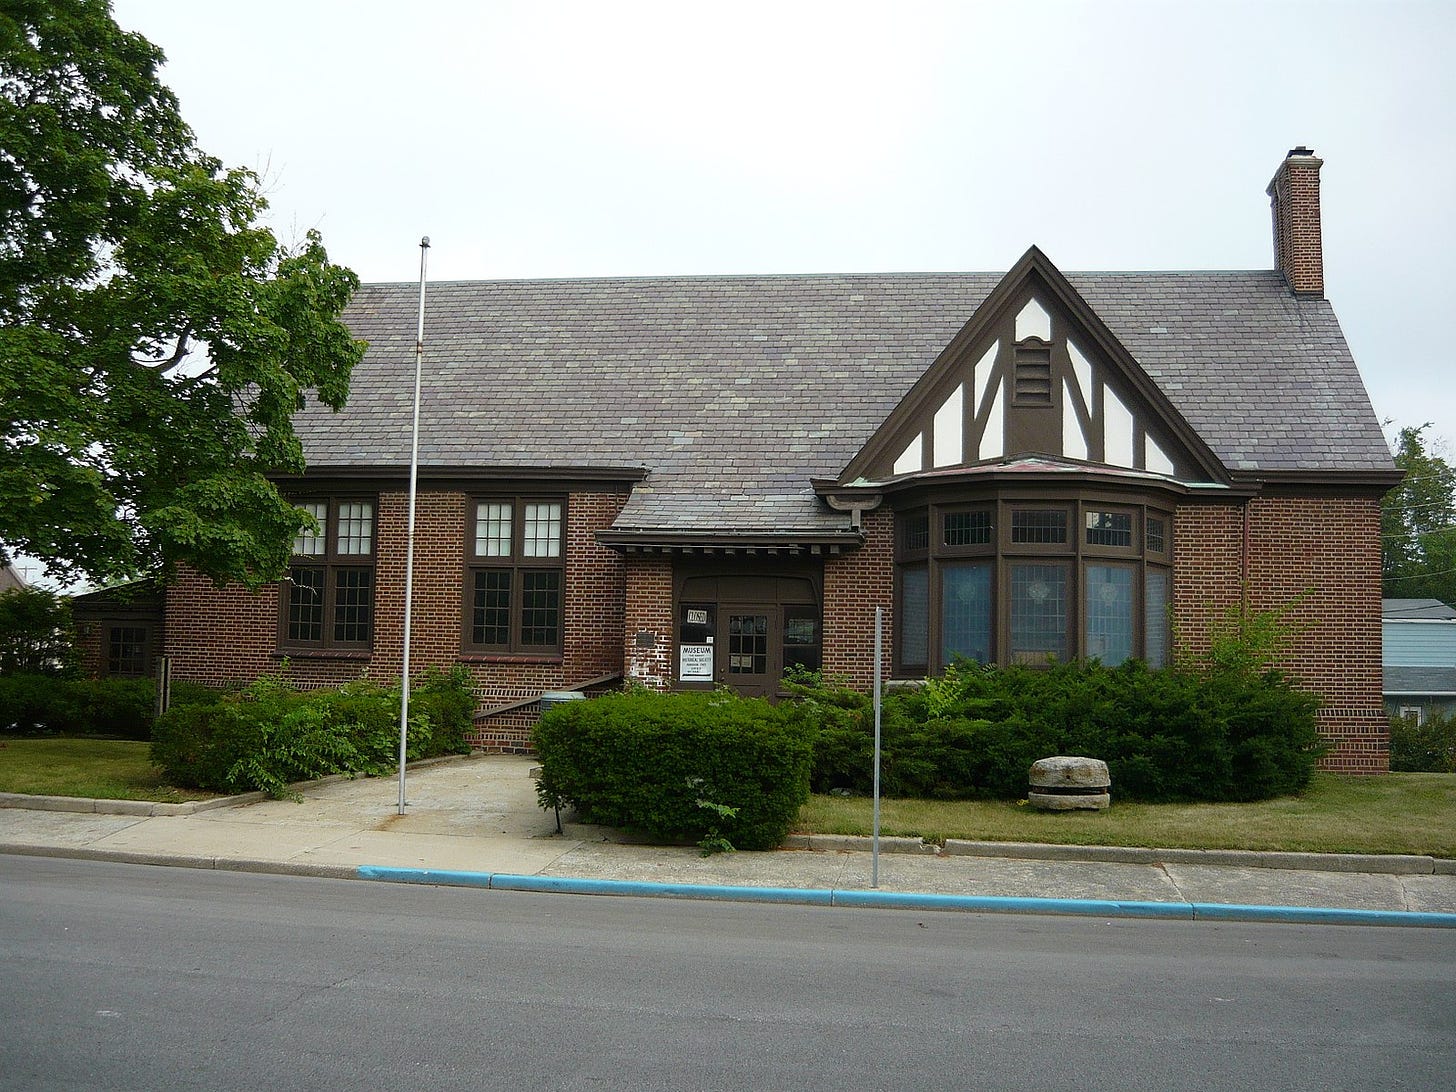 Image of the Hobart, Indiana, Carnegie Library